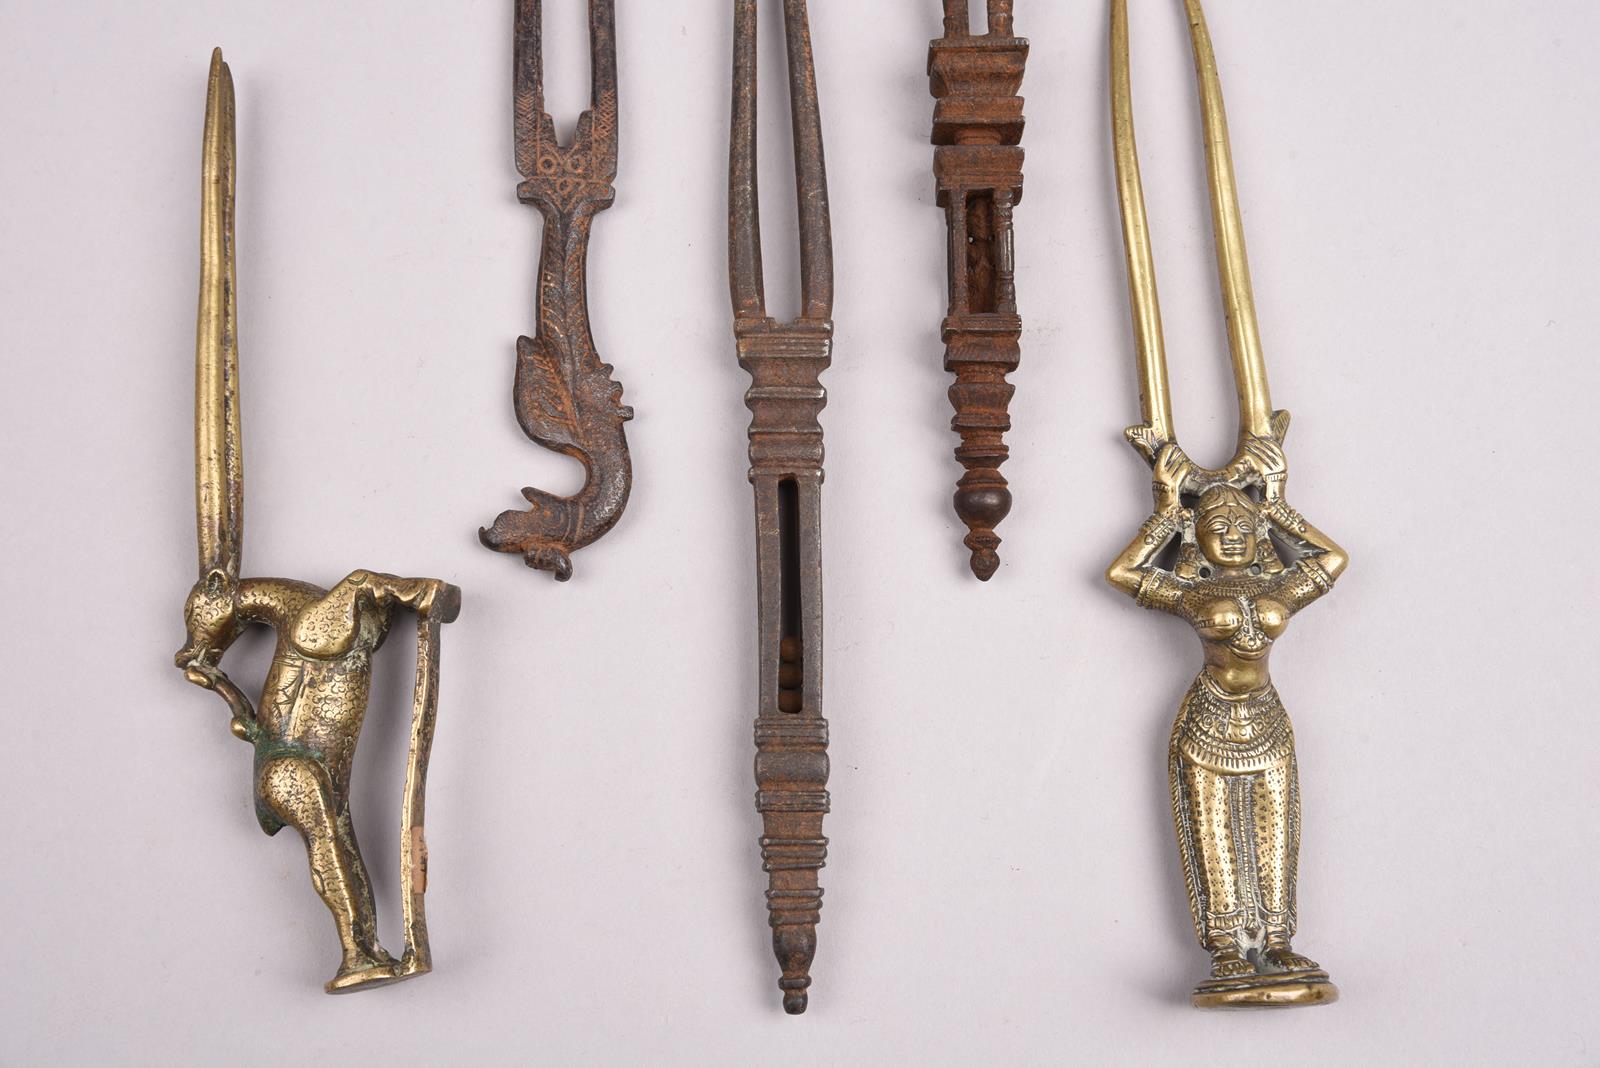 Five Indian hairpins brass and steel, all with two prongs, including a standing female figure, a - Image 4 of 4